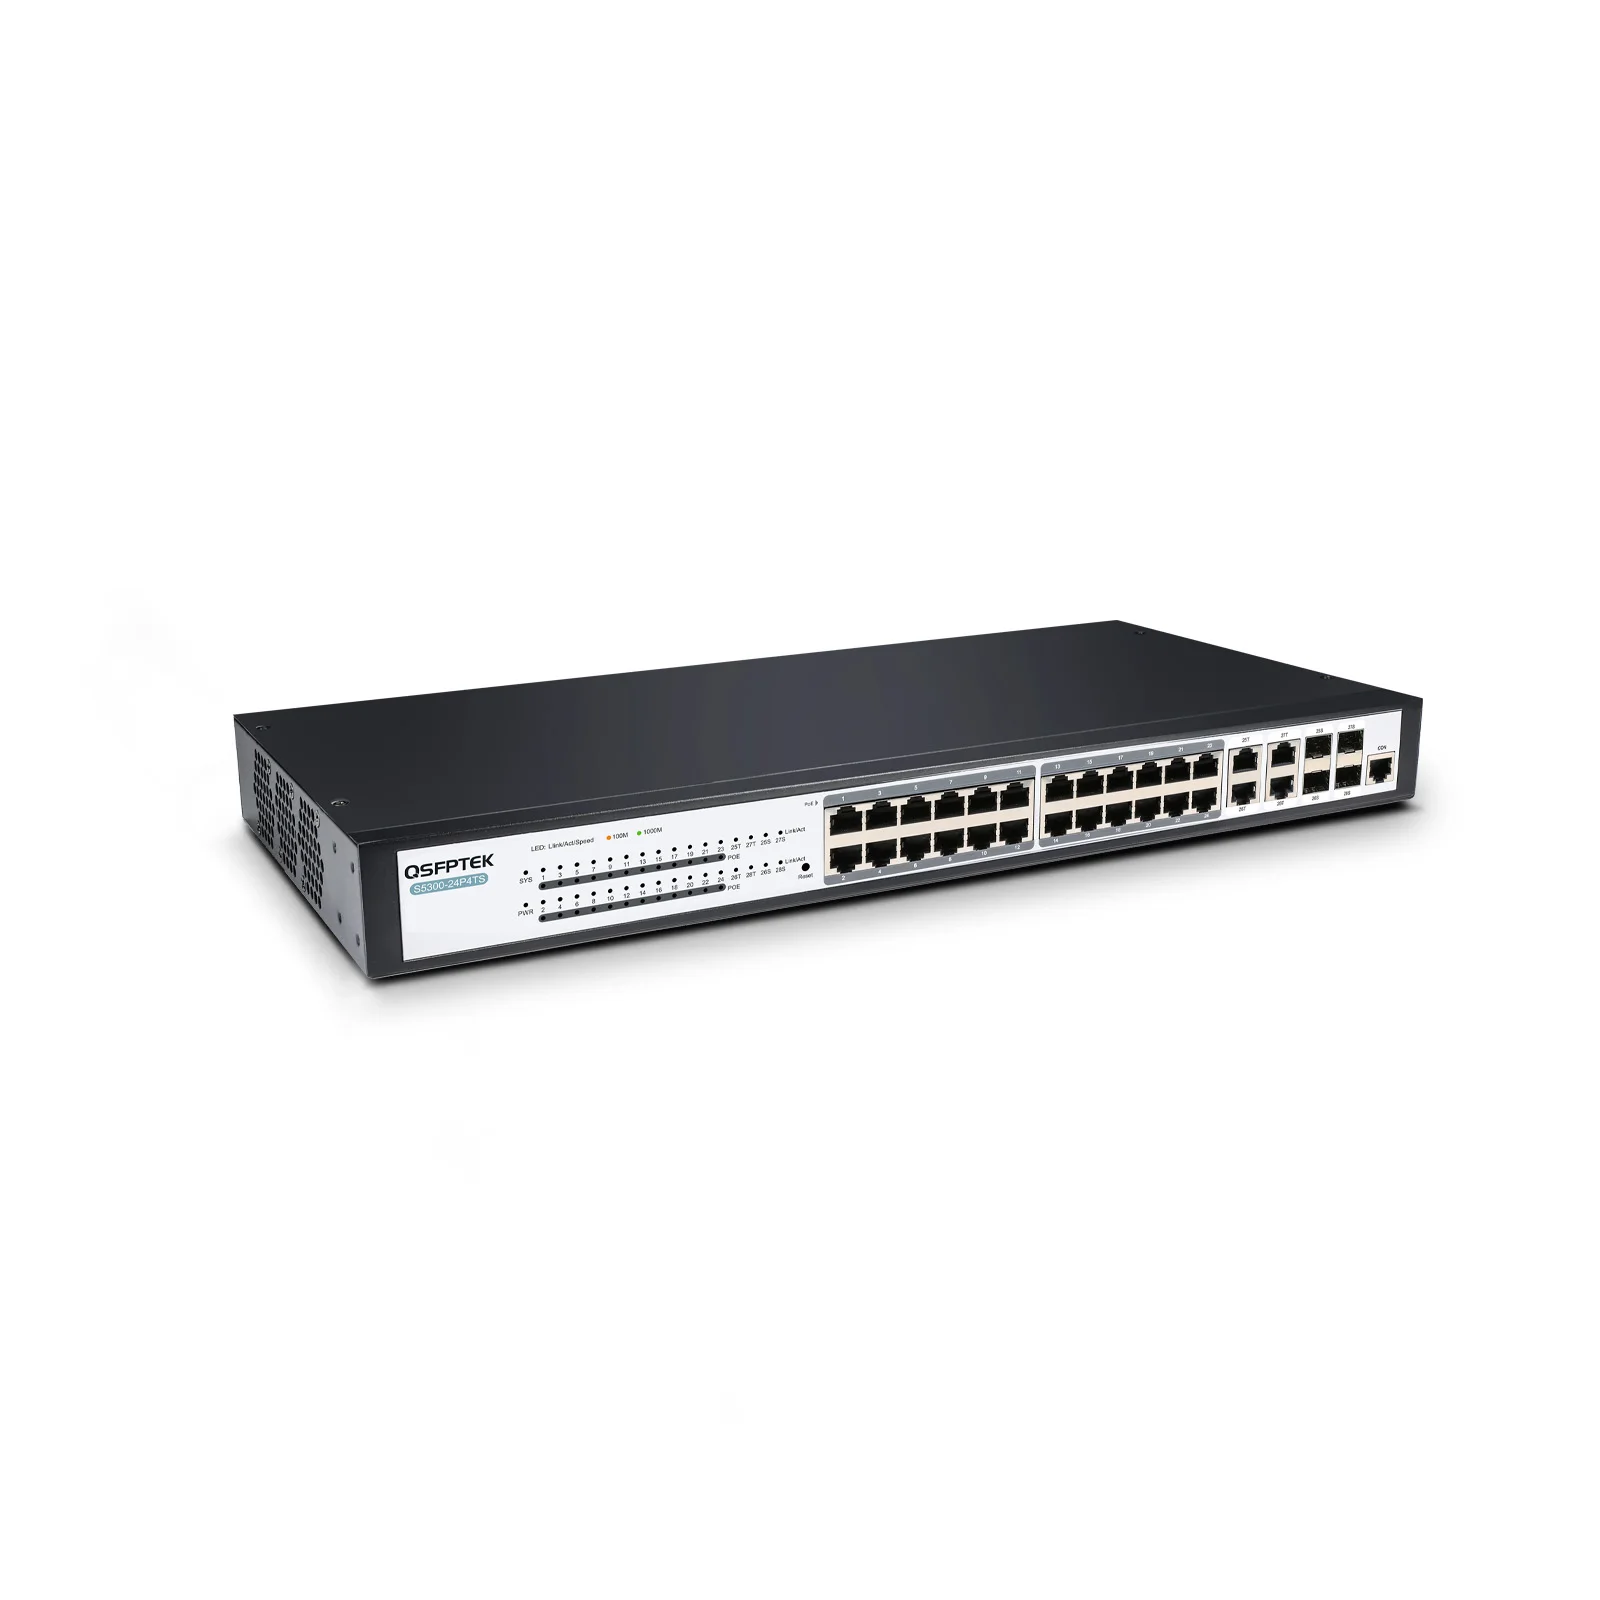 IMS3210-8P2S L2 Managed Industrial Switch PoE -AOA Tech